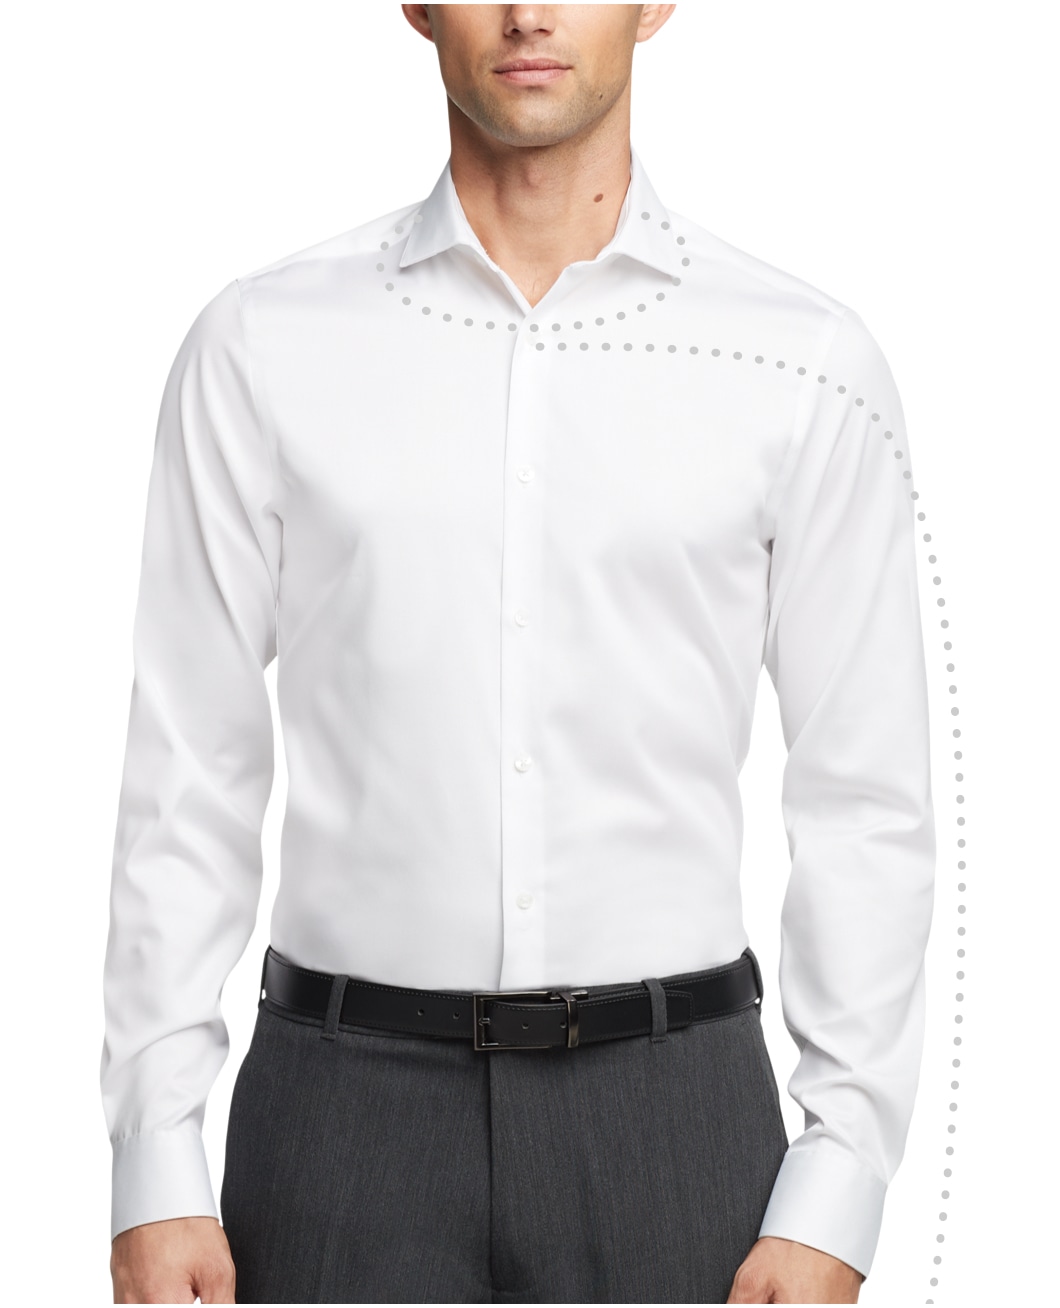 Men's Dress Shirt Cuffs - What is the right size? Button cuff proper  proportion 